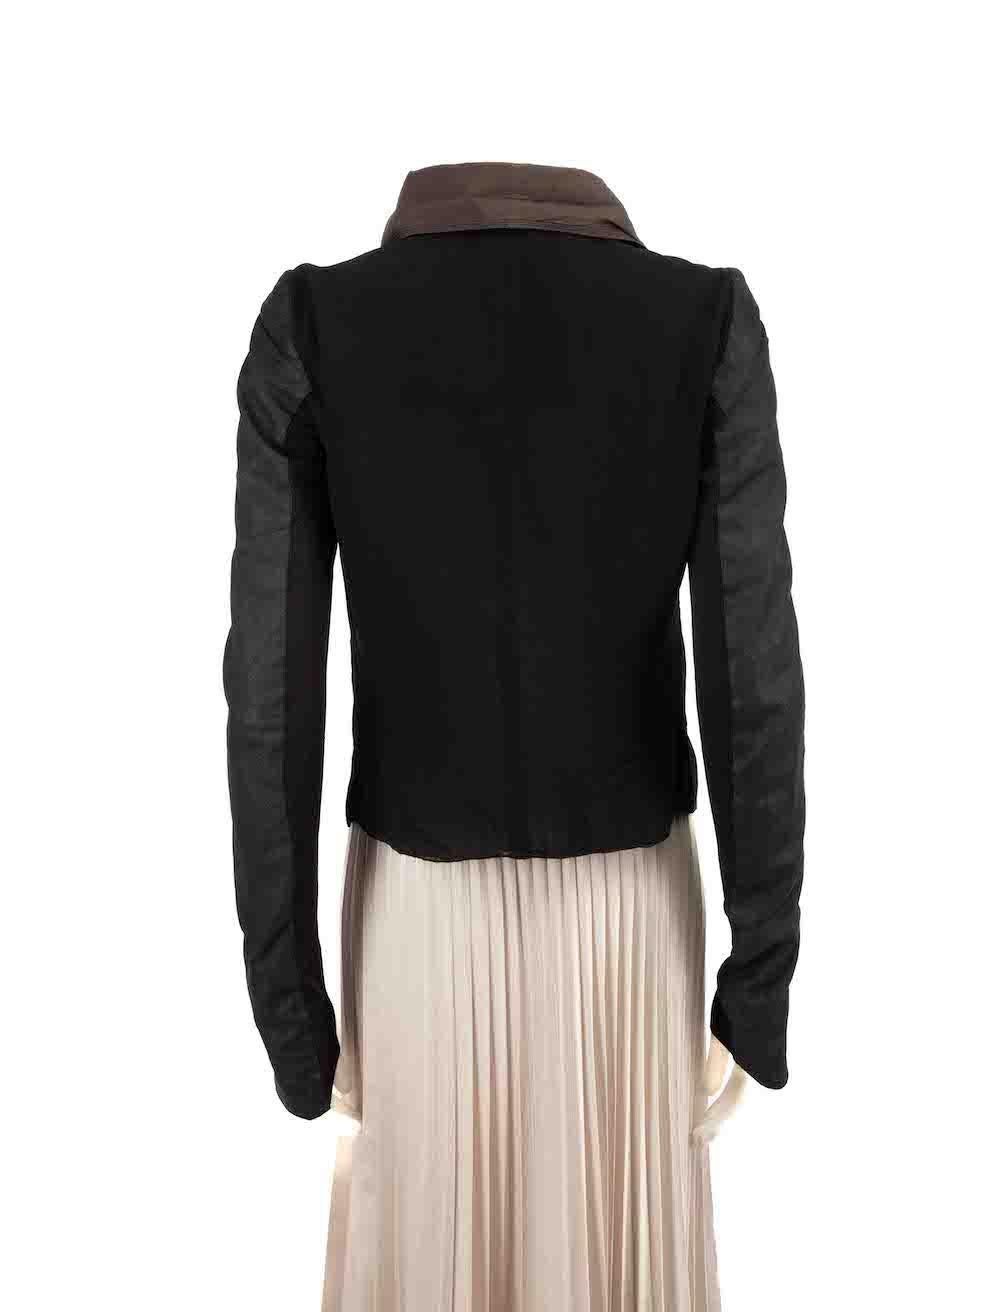 Rick Owens Black Asymmetric Panelled Jacket Size L In Good Condition For Sale In London, GB